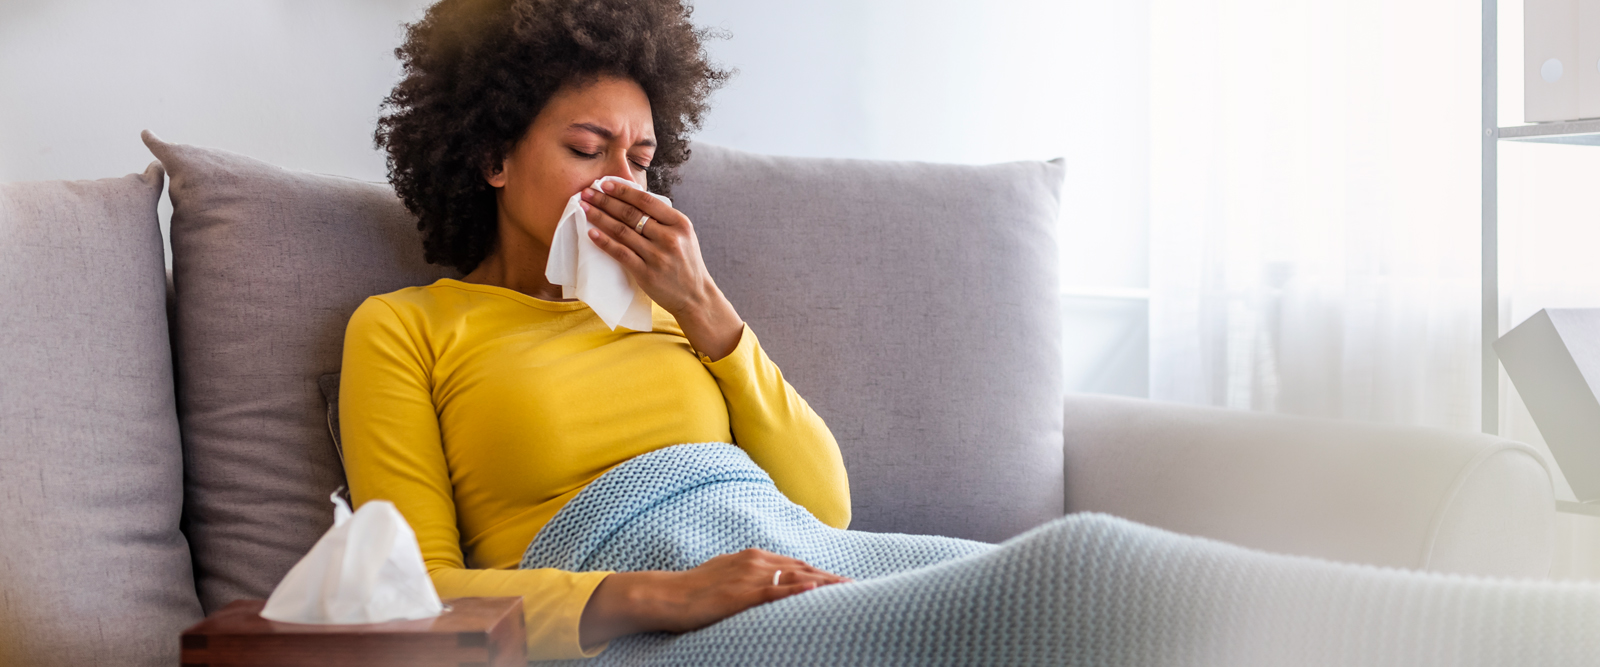 Woman on the couch sick with either flu or COVID-19.